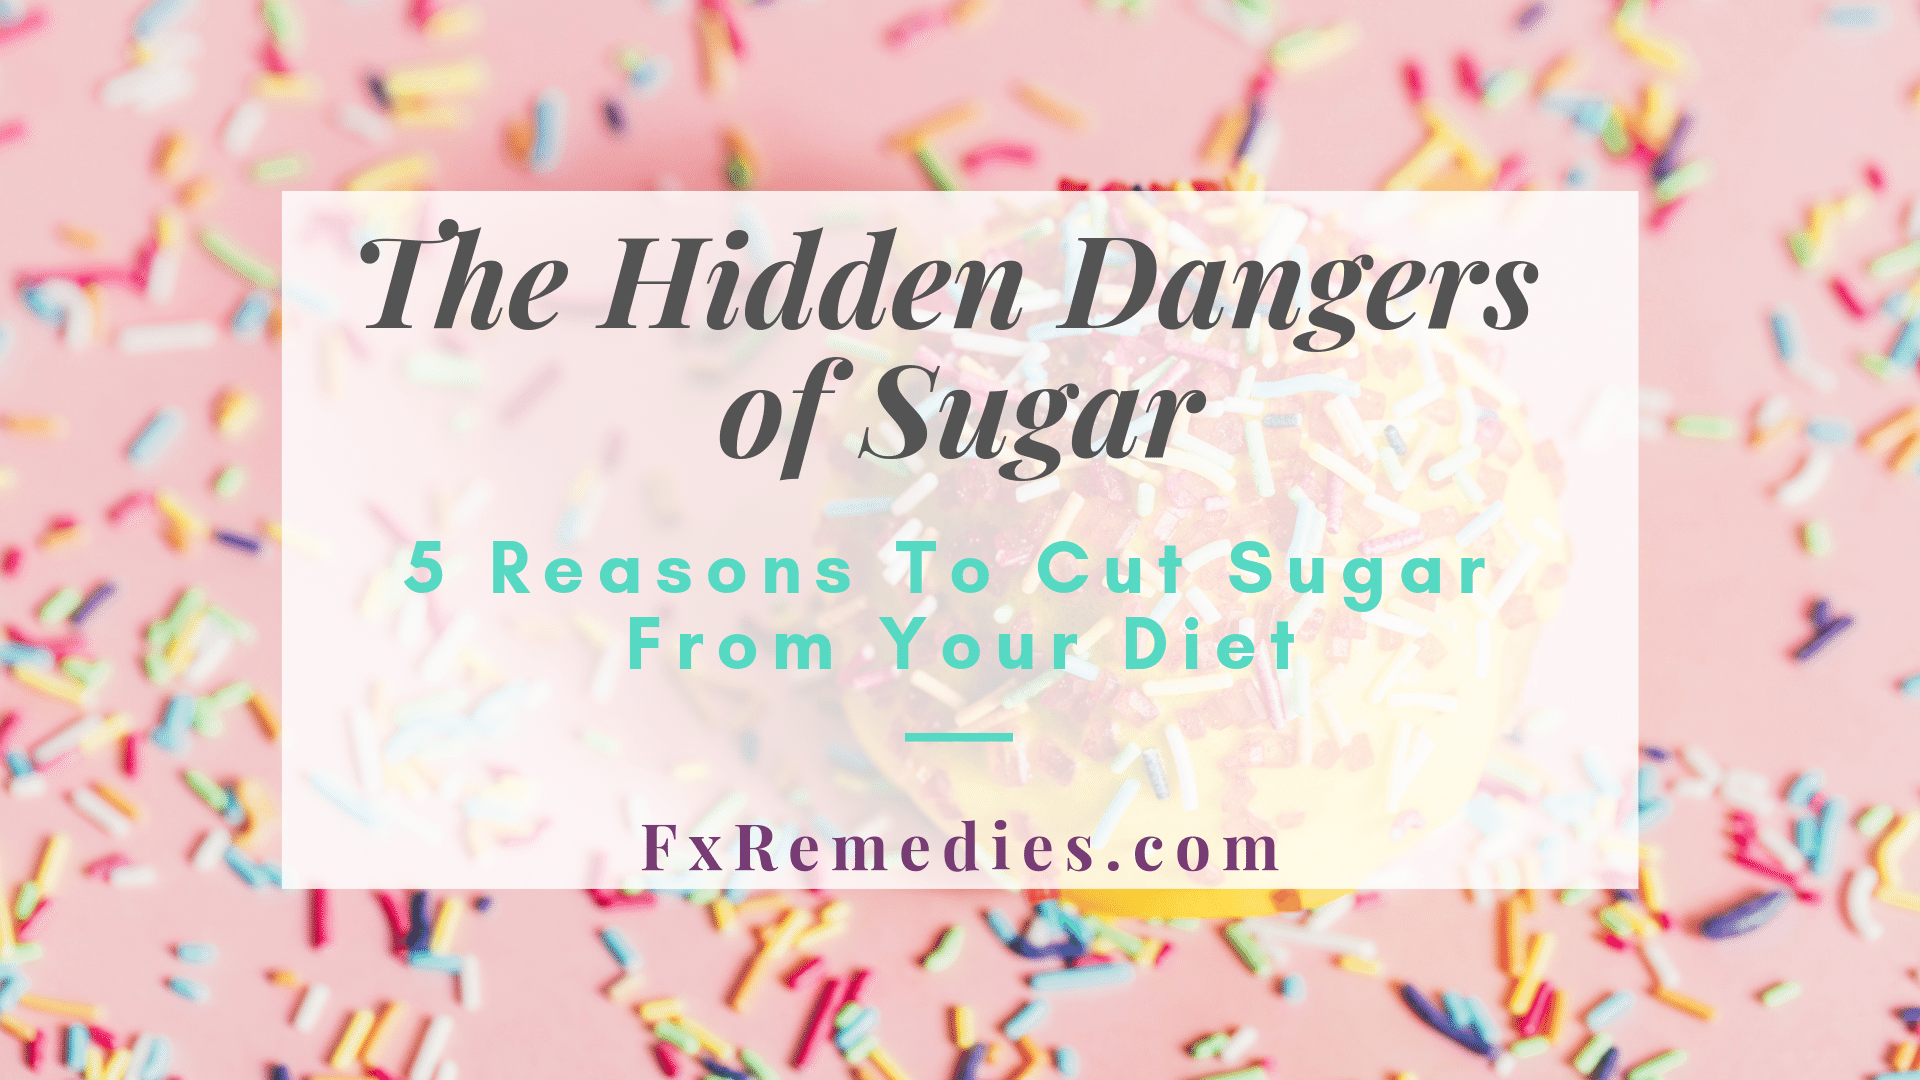 Do you know the hidden dangers of sugar? It's hidden in all kinds of foods and unfortunately it is doing a lot of damage to our health and it’s making us gain weight in record numbers.